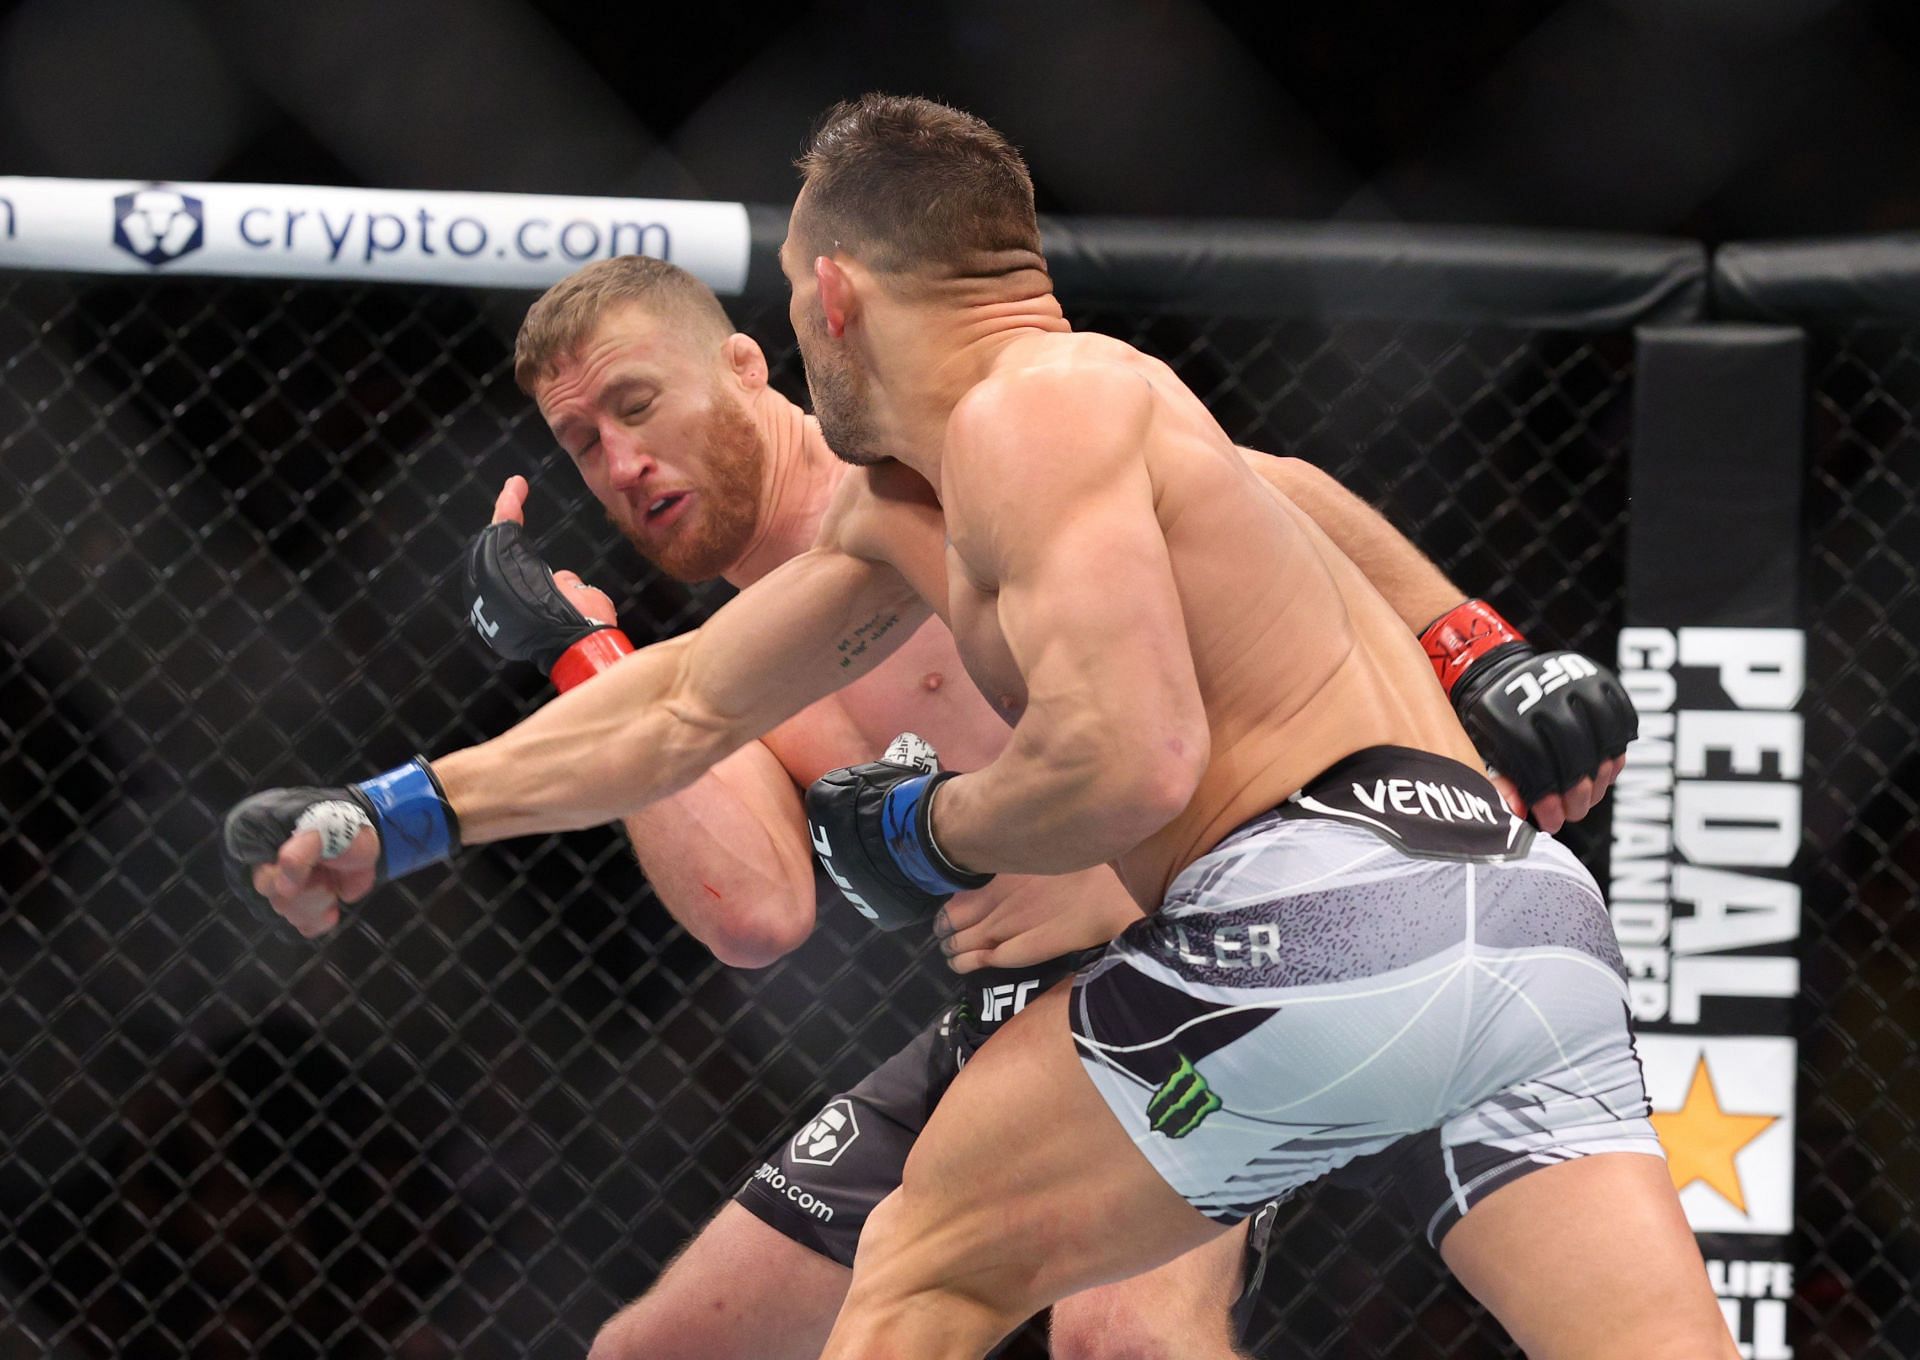 Michael Chandler and Justin Gaethje would both make excellent opponents for Max Holloway at 155lbs